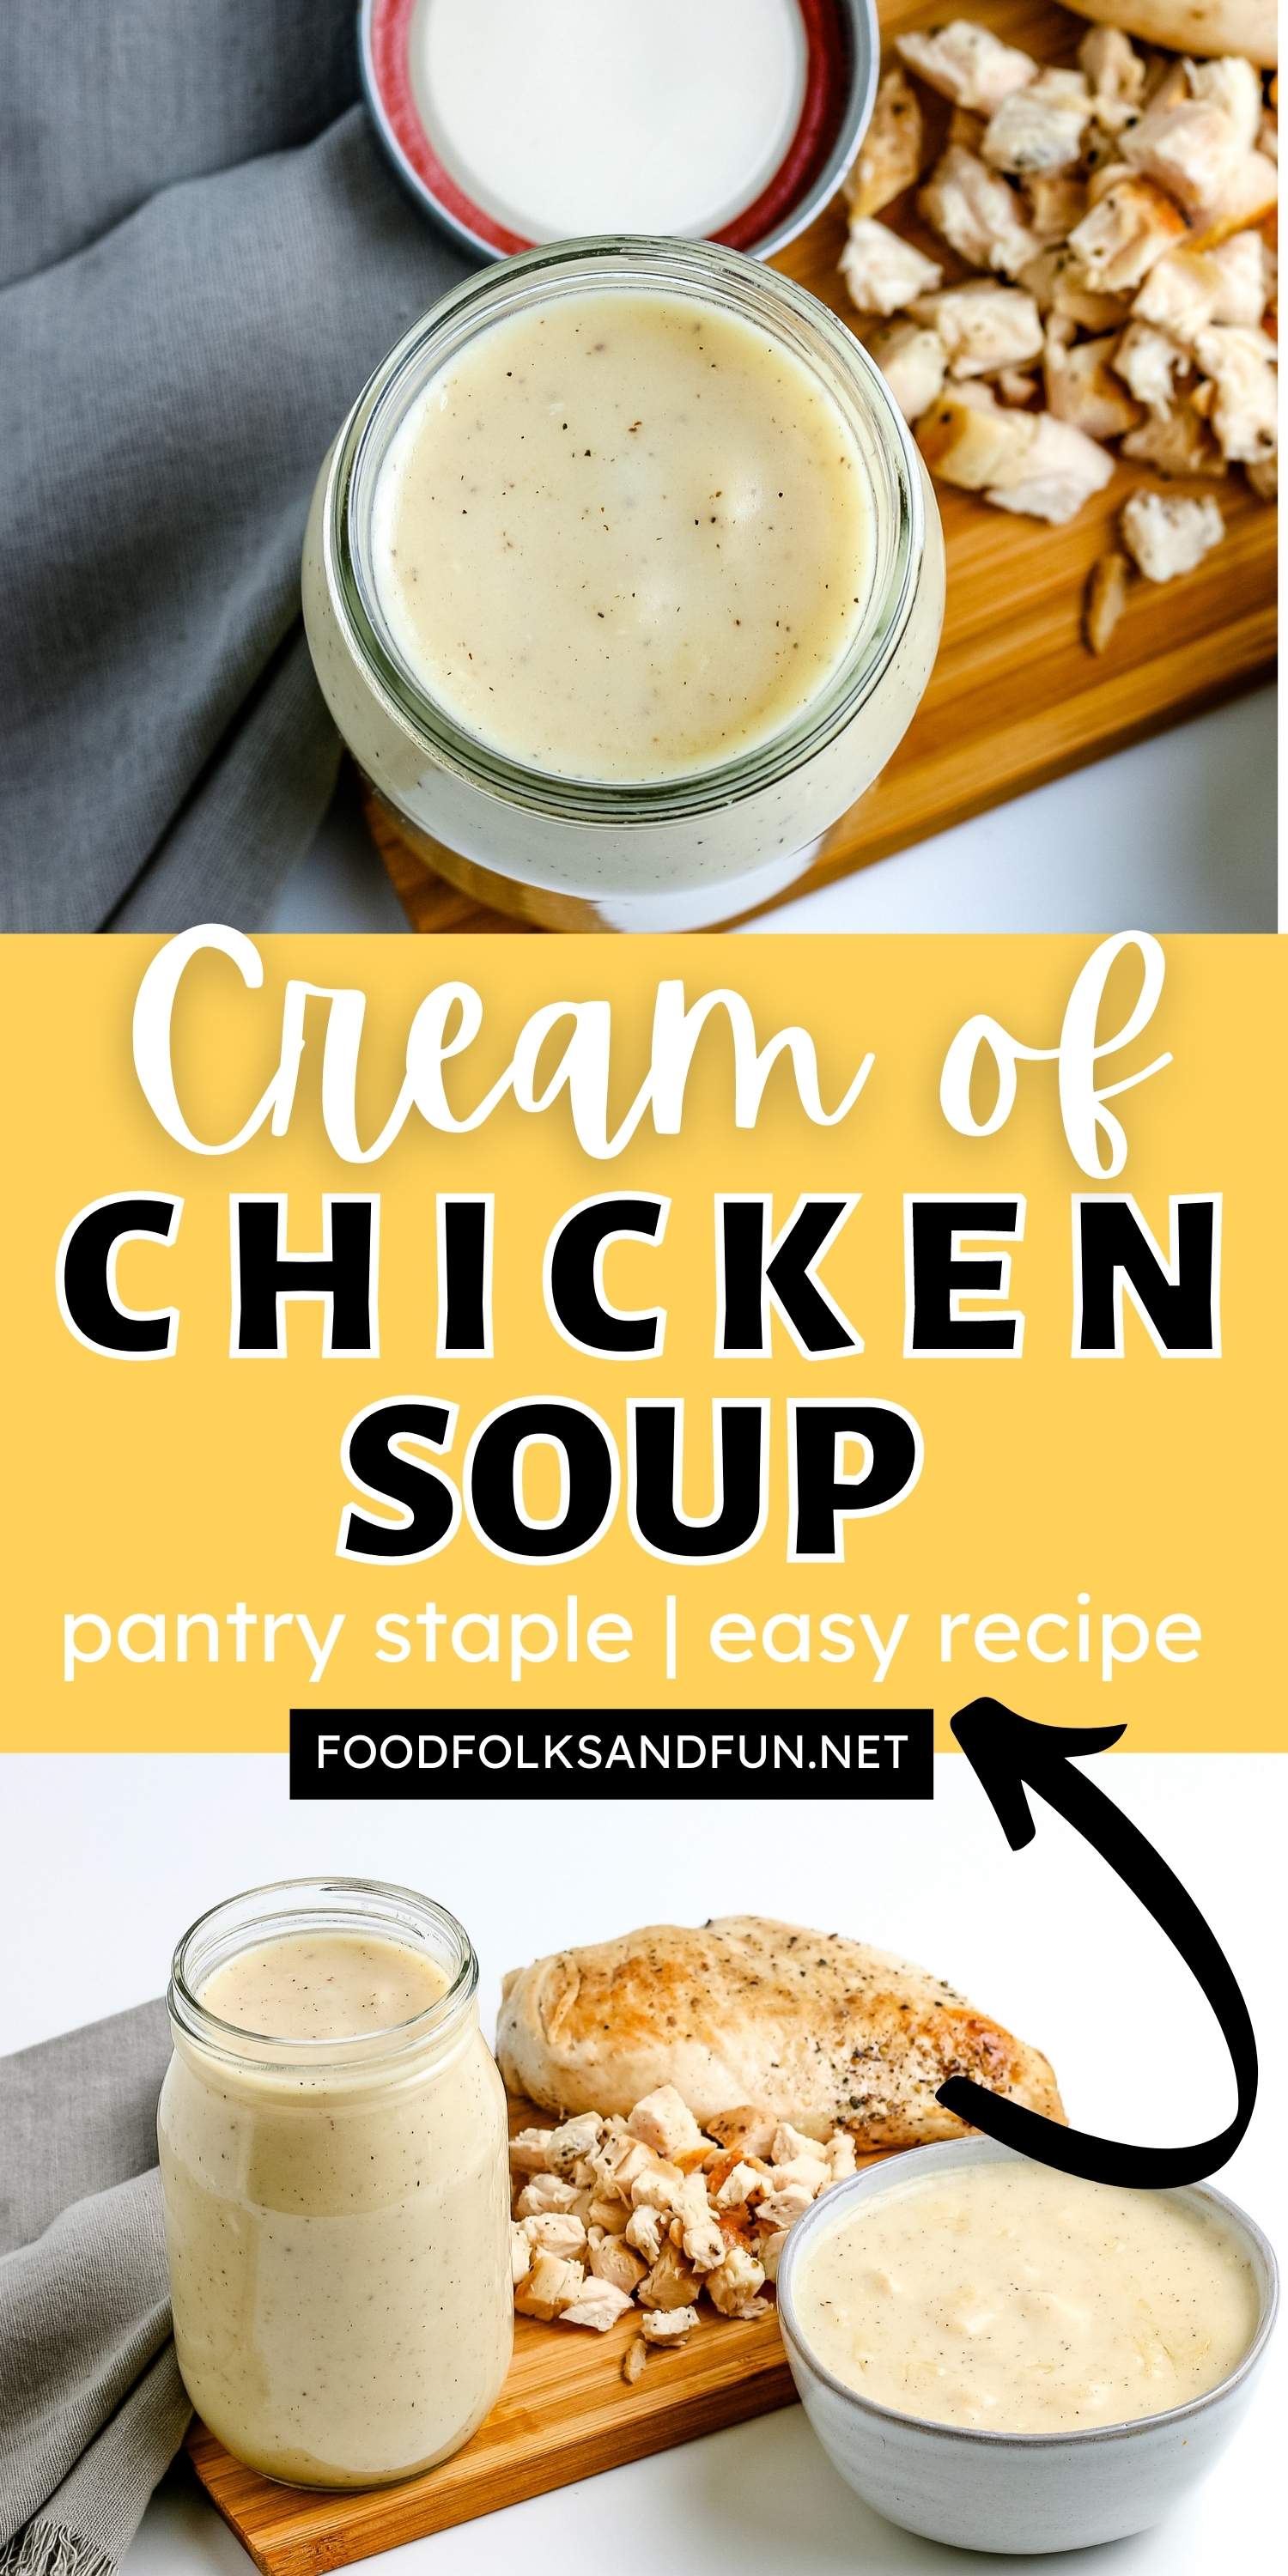 This Homemade Cream of Chicken Soup recipe is a delicious substitute for the pantry staple, condensed soup. It’s great for adding to casseroles and soups. via @foodfolksandfun